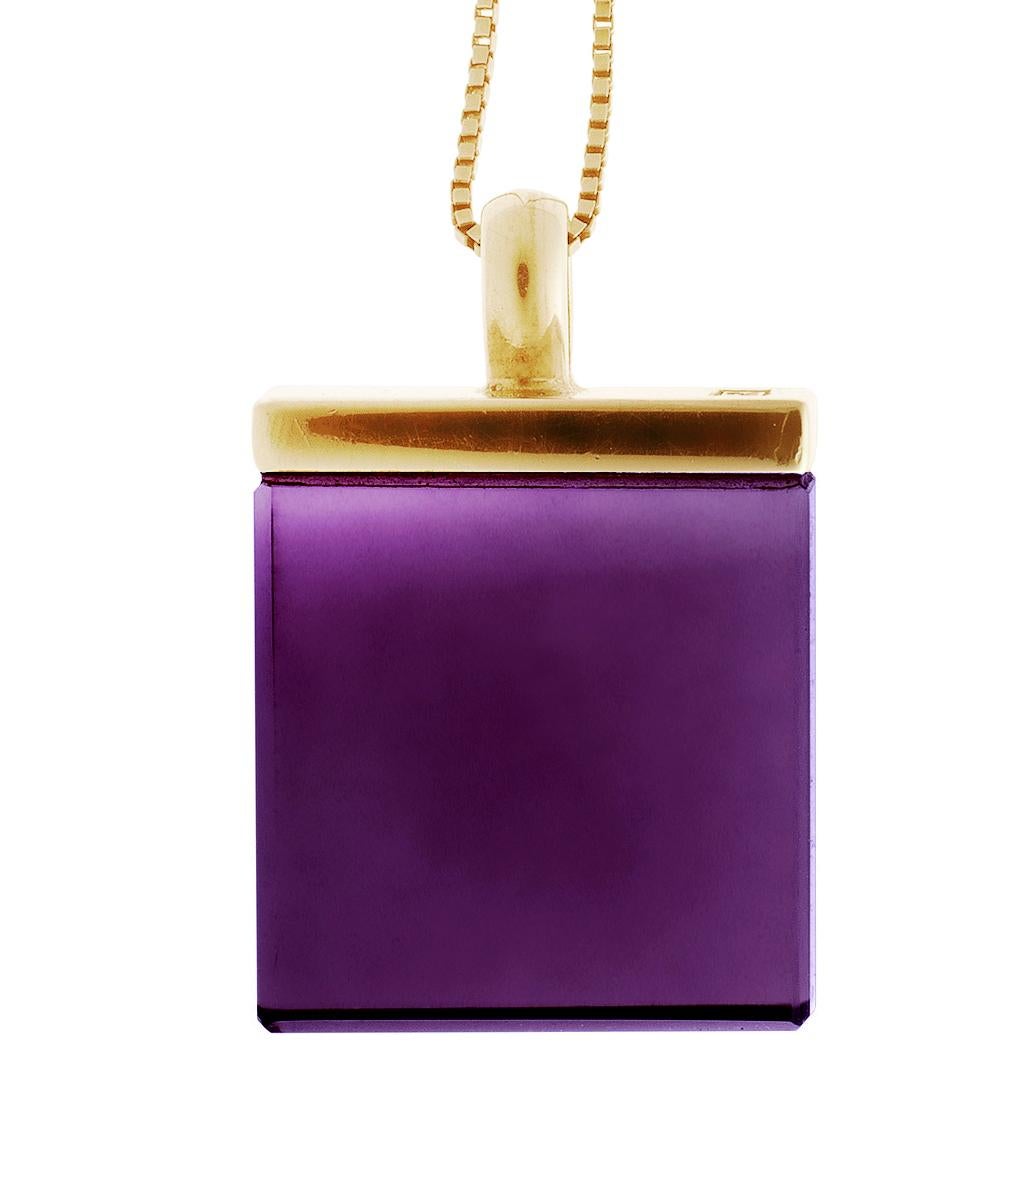 This art deco style pendant necklace is made of 18 karat rose gold and features a large 15x15x8 mm grown amethyst that was specially cut for the artist. It is part of the Ink collection, which has been featured in Harper's Bazaar and Vogue UA. The